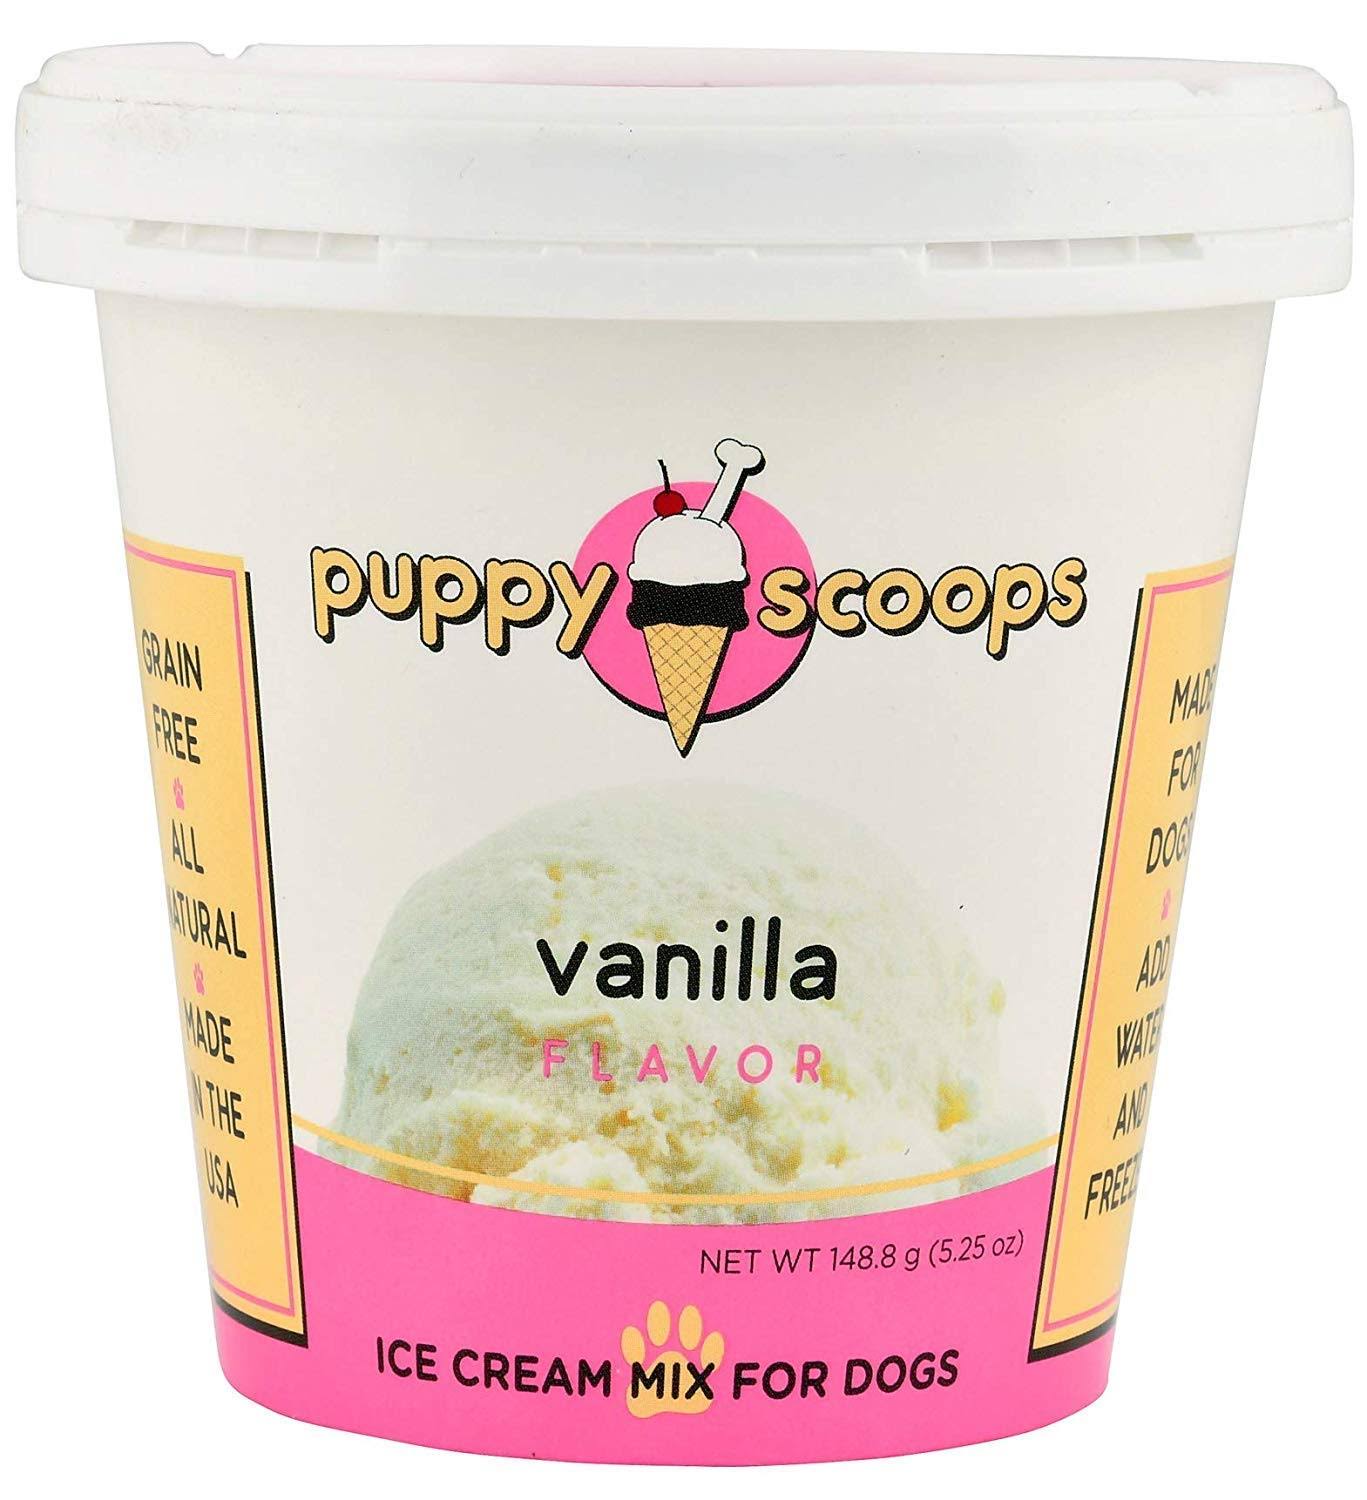 Puppy Scoops Ice Cream Mix for Dogs and Puppies - Vanilla Flavor, 6oz